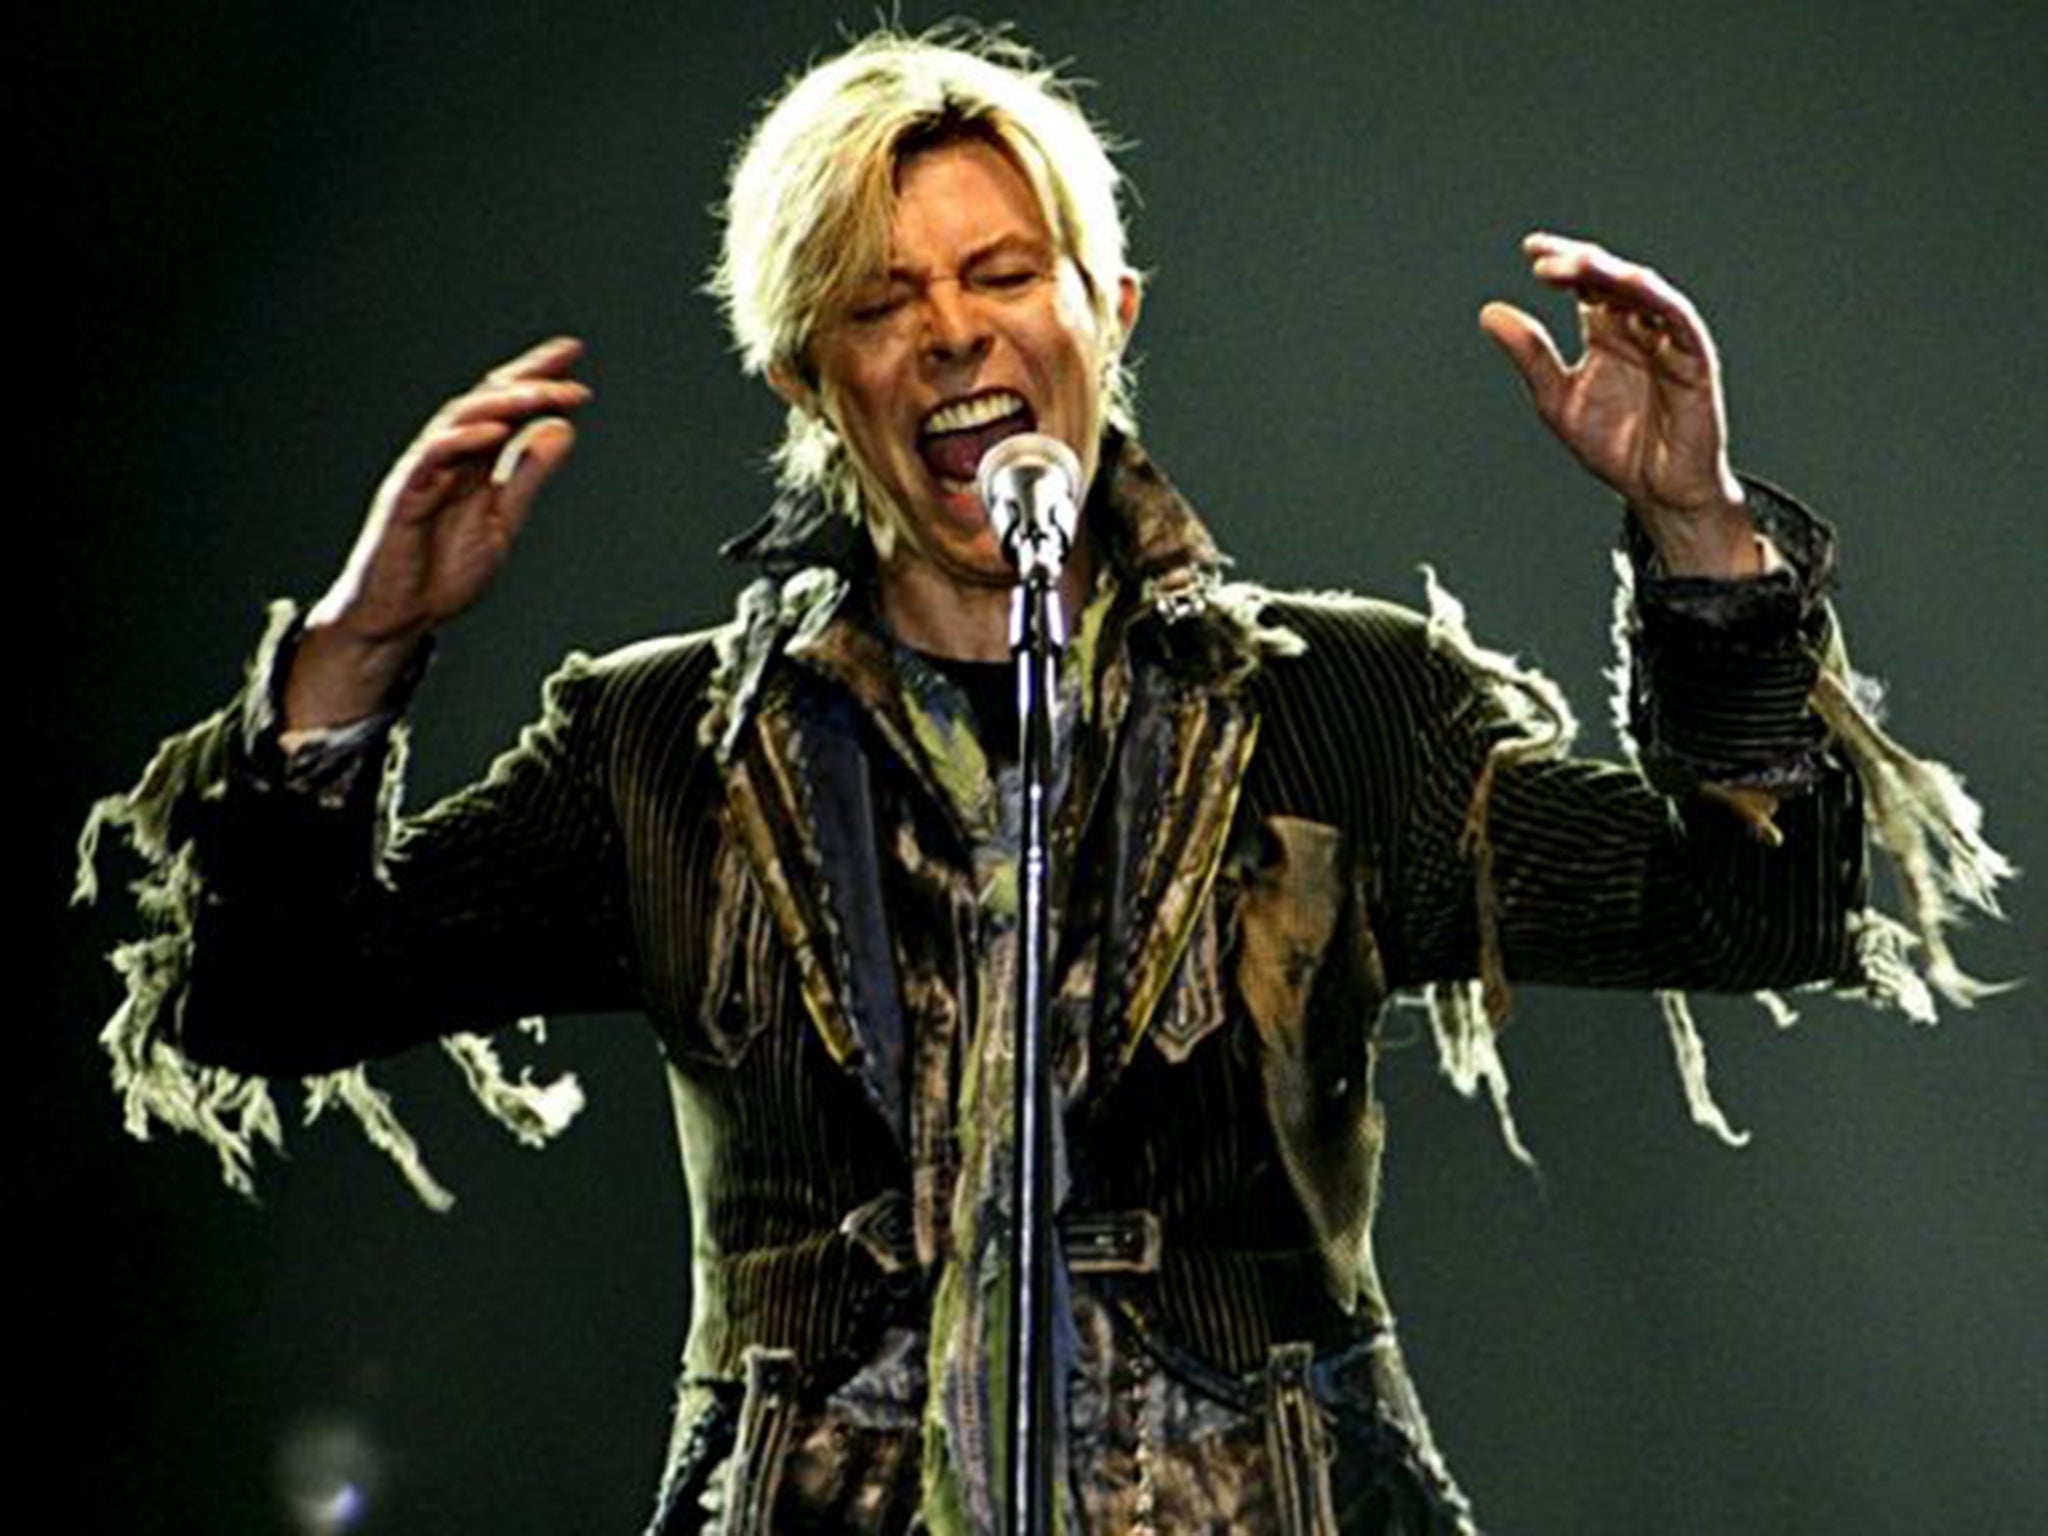 David Bowie on stage in Prague during his 'A Reality Tour' in 2004